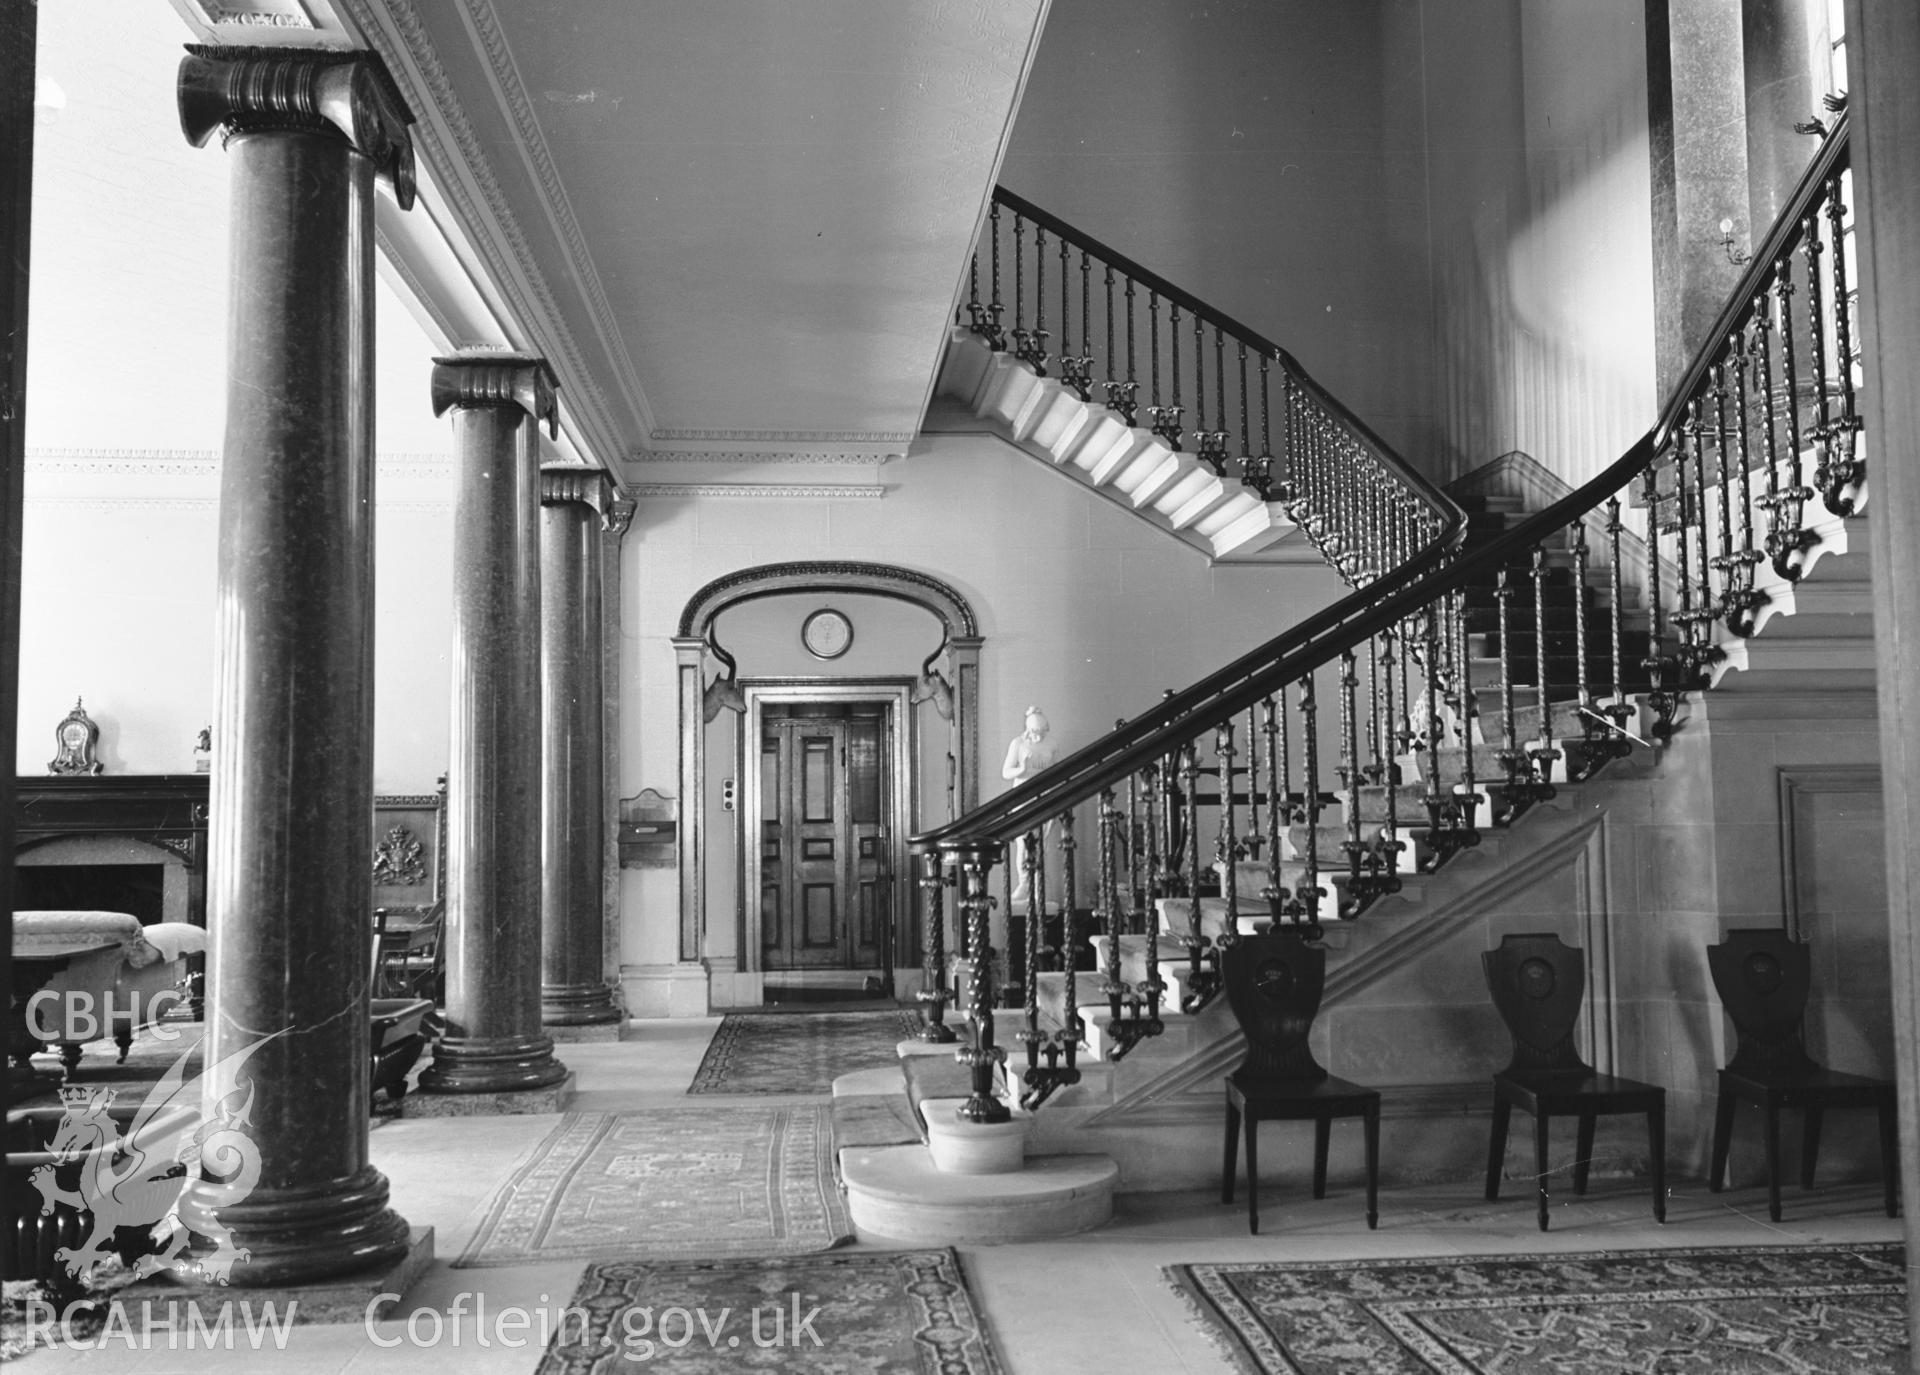 Interior view showing entrance hall and staircase at Glynllifon Hall